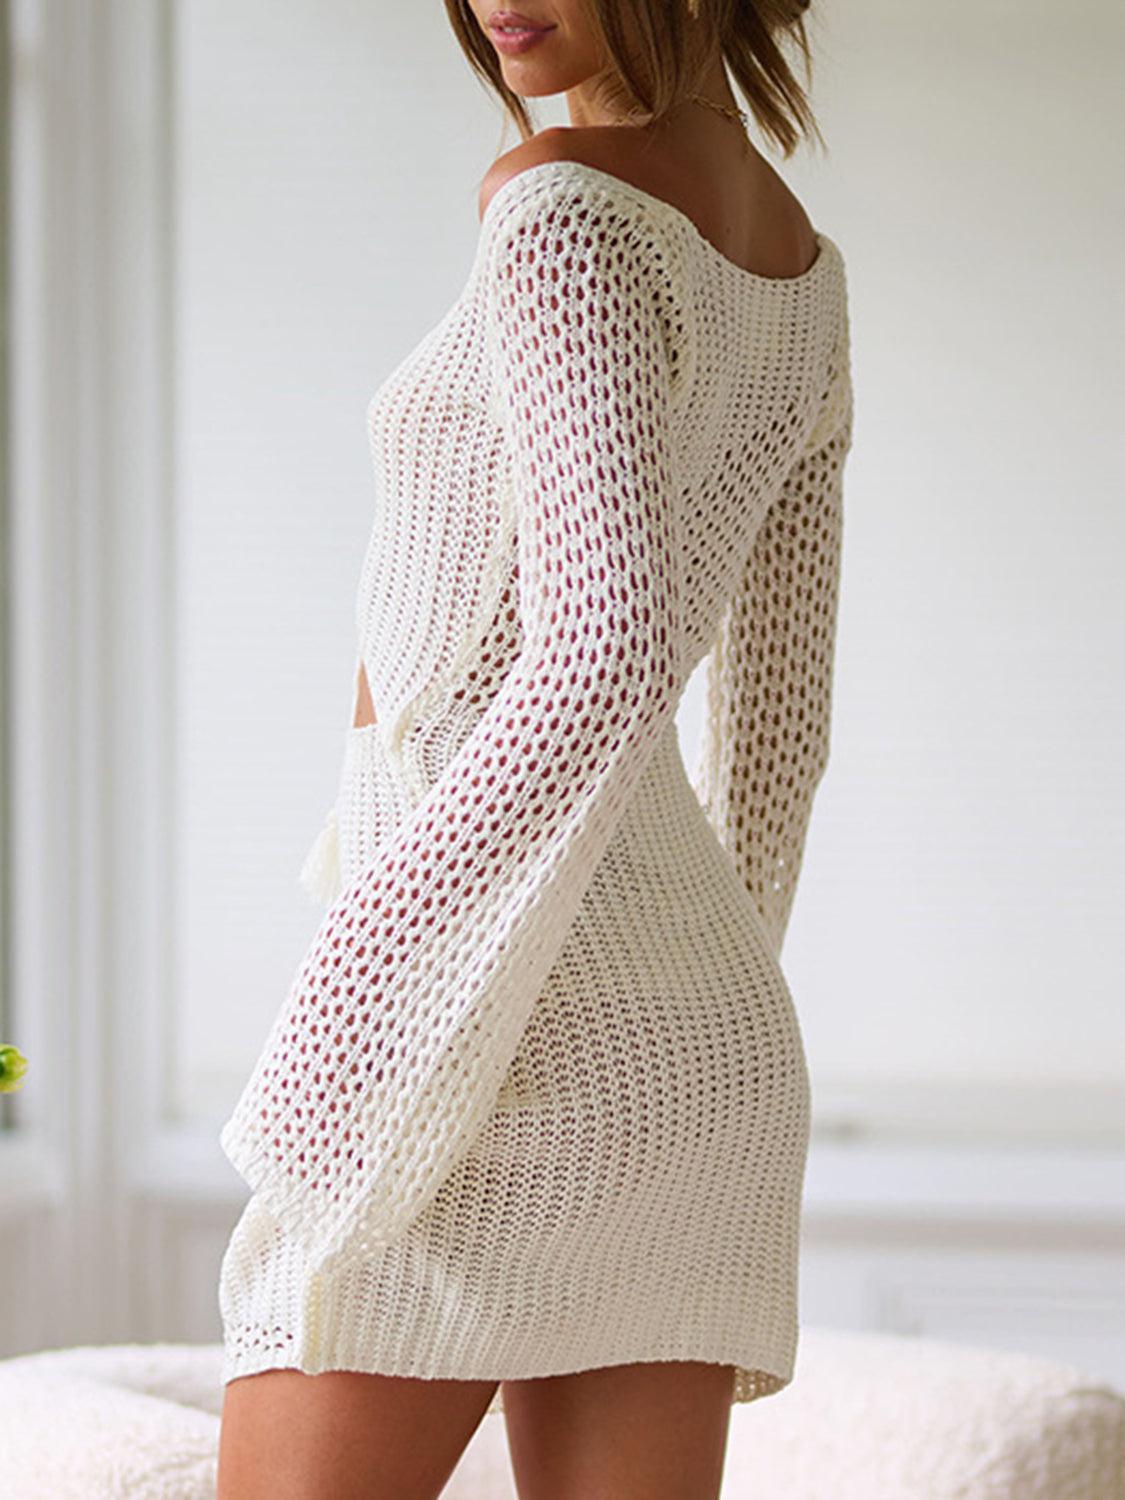 a woman in a white sweater dress posing for a picture